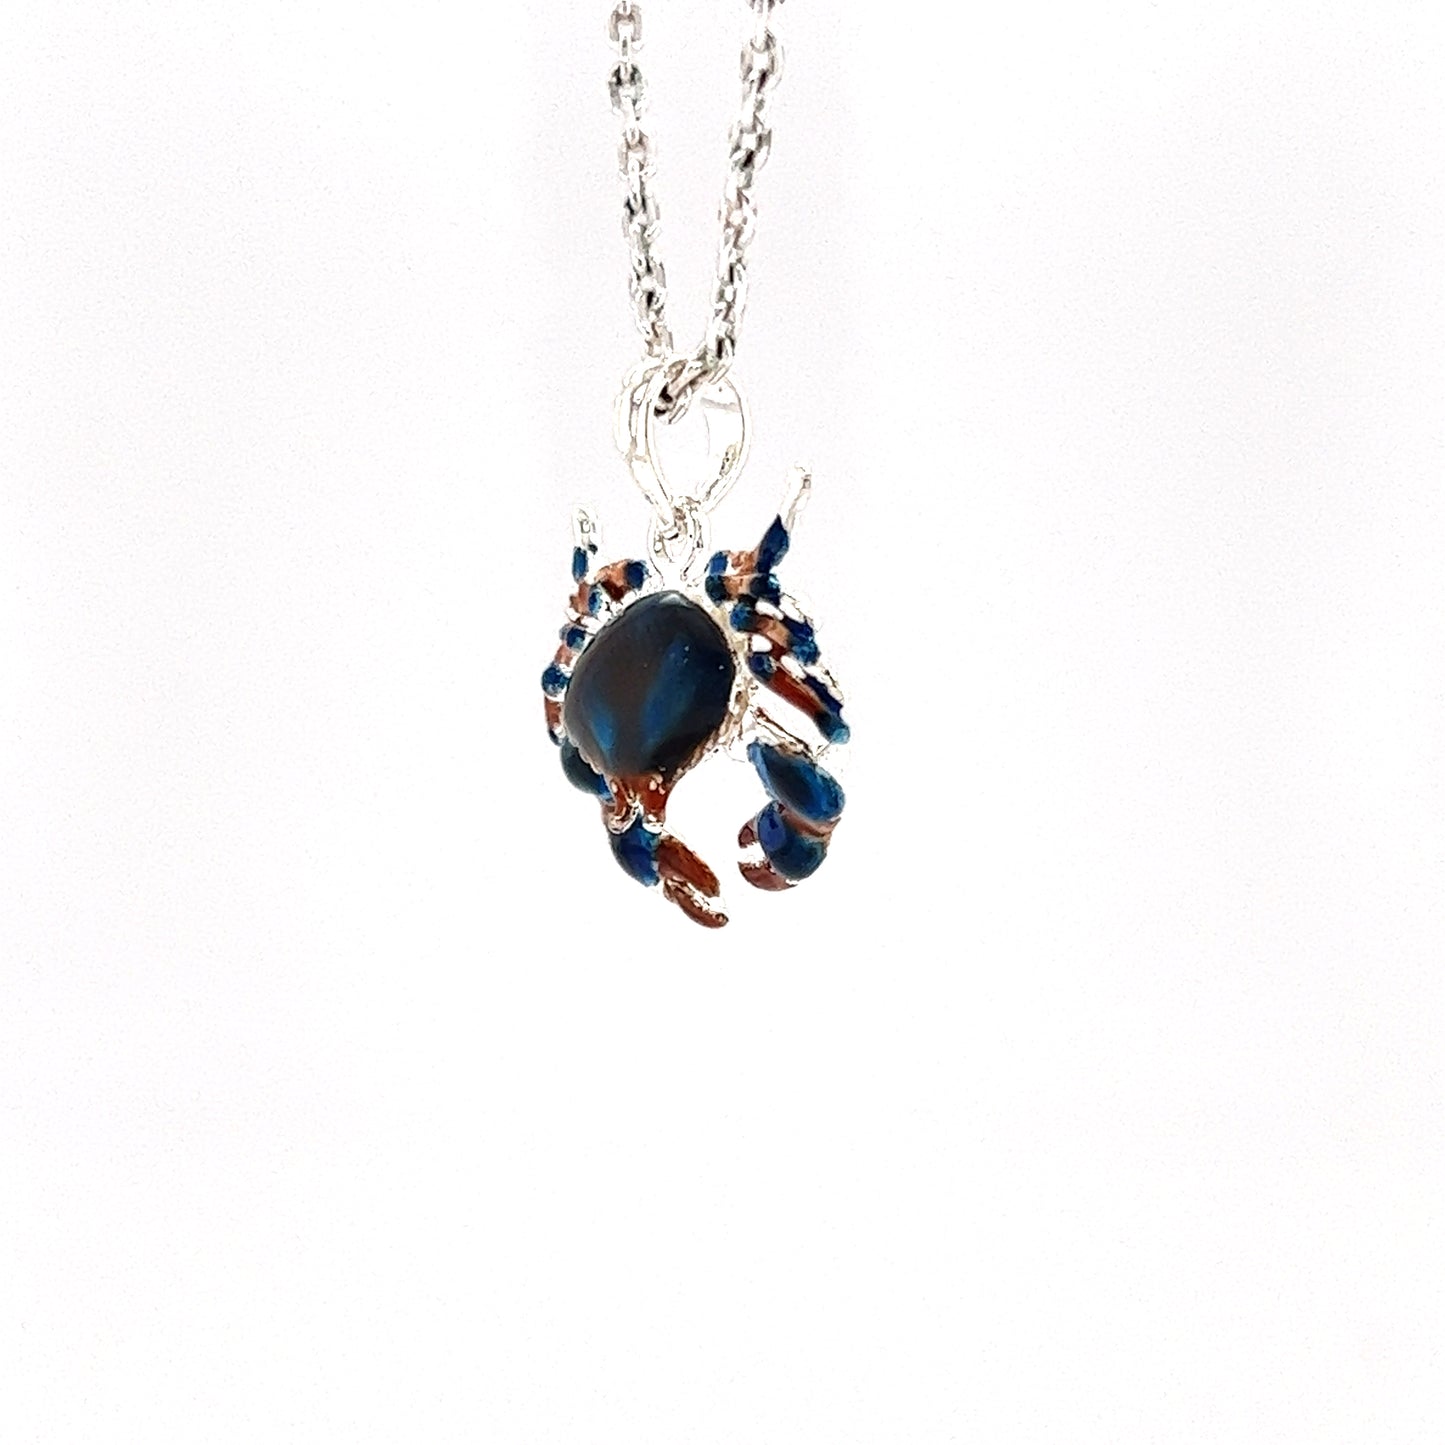 Blue Stone Crab Small Pendant with Enameling in Sterling Silver Right View with Chain